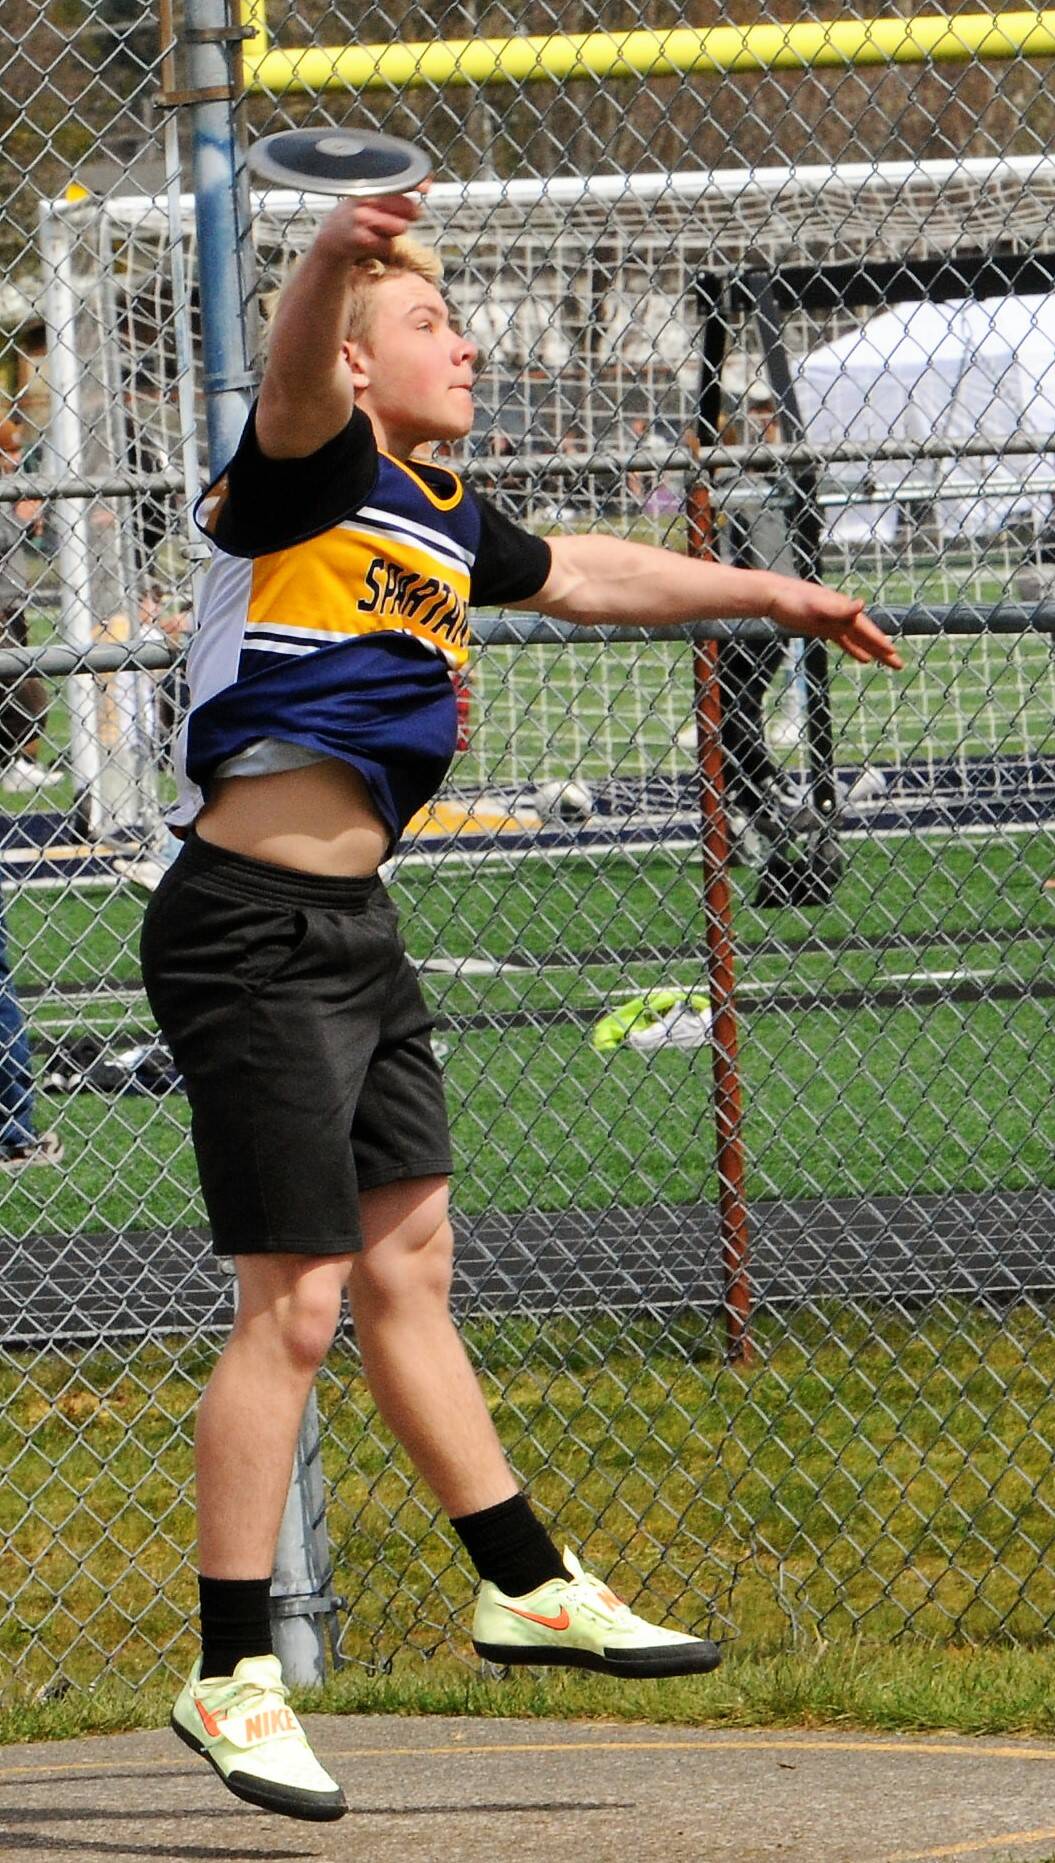 Spartan Nate Dahlgren competed in the discus throw. Photo by Lonnie Archibald